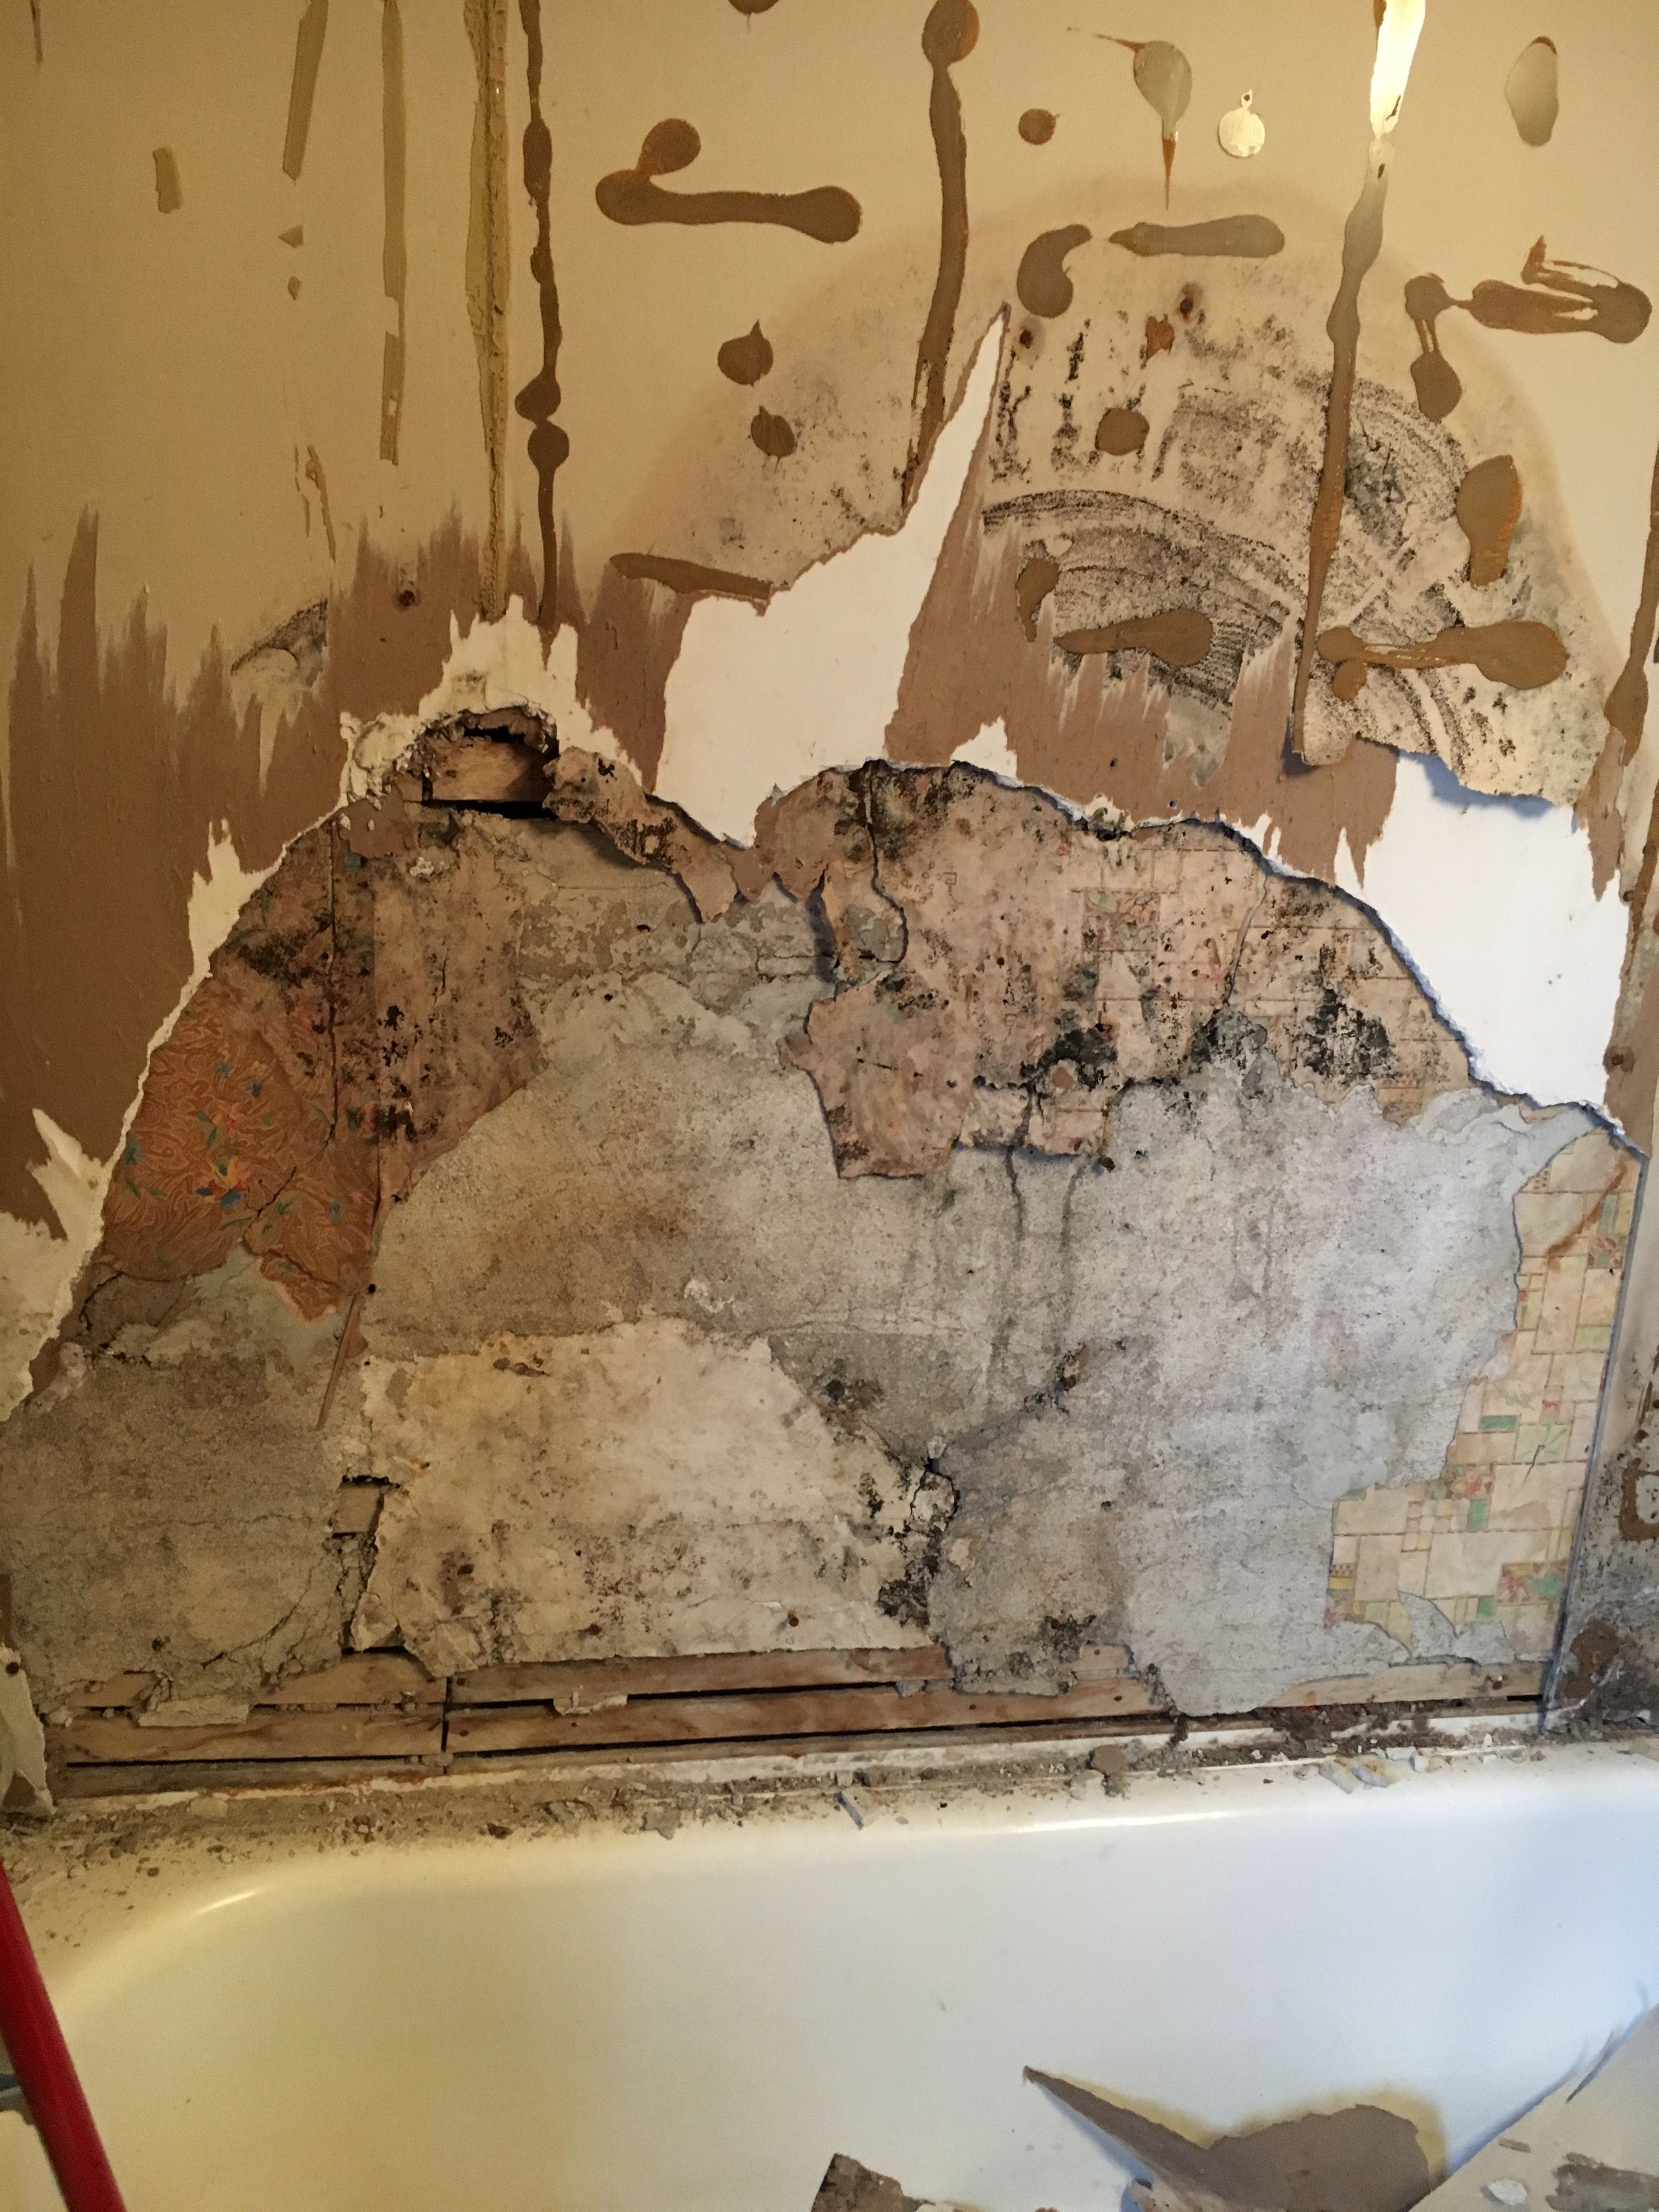 Behind The Plastic Tub Surround In Upstairs Bathroom Mold